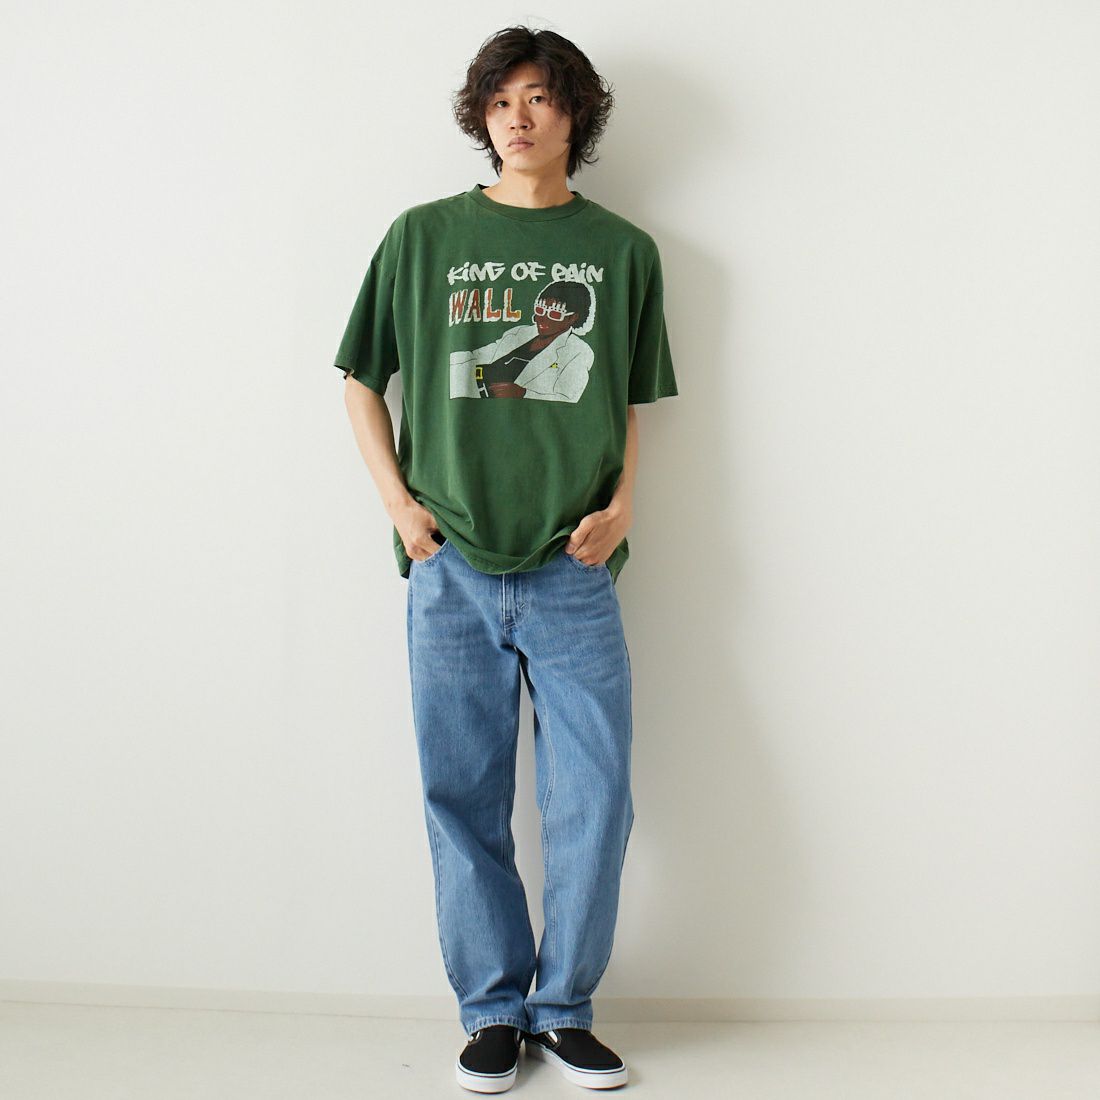 REMI RELIEF [レミレリーフ] 別注 20天竺プリントTシャツ KING [RN24329277-JF] GRN &&モデル身長：182cm 着用サイズ：M&&